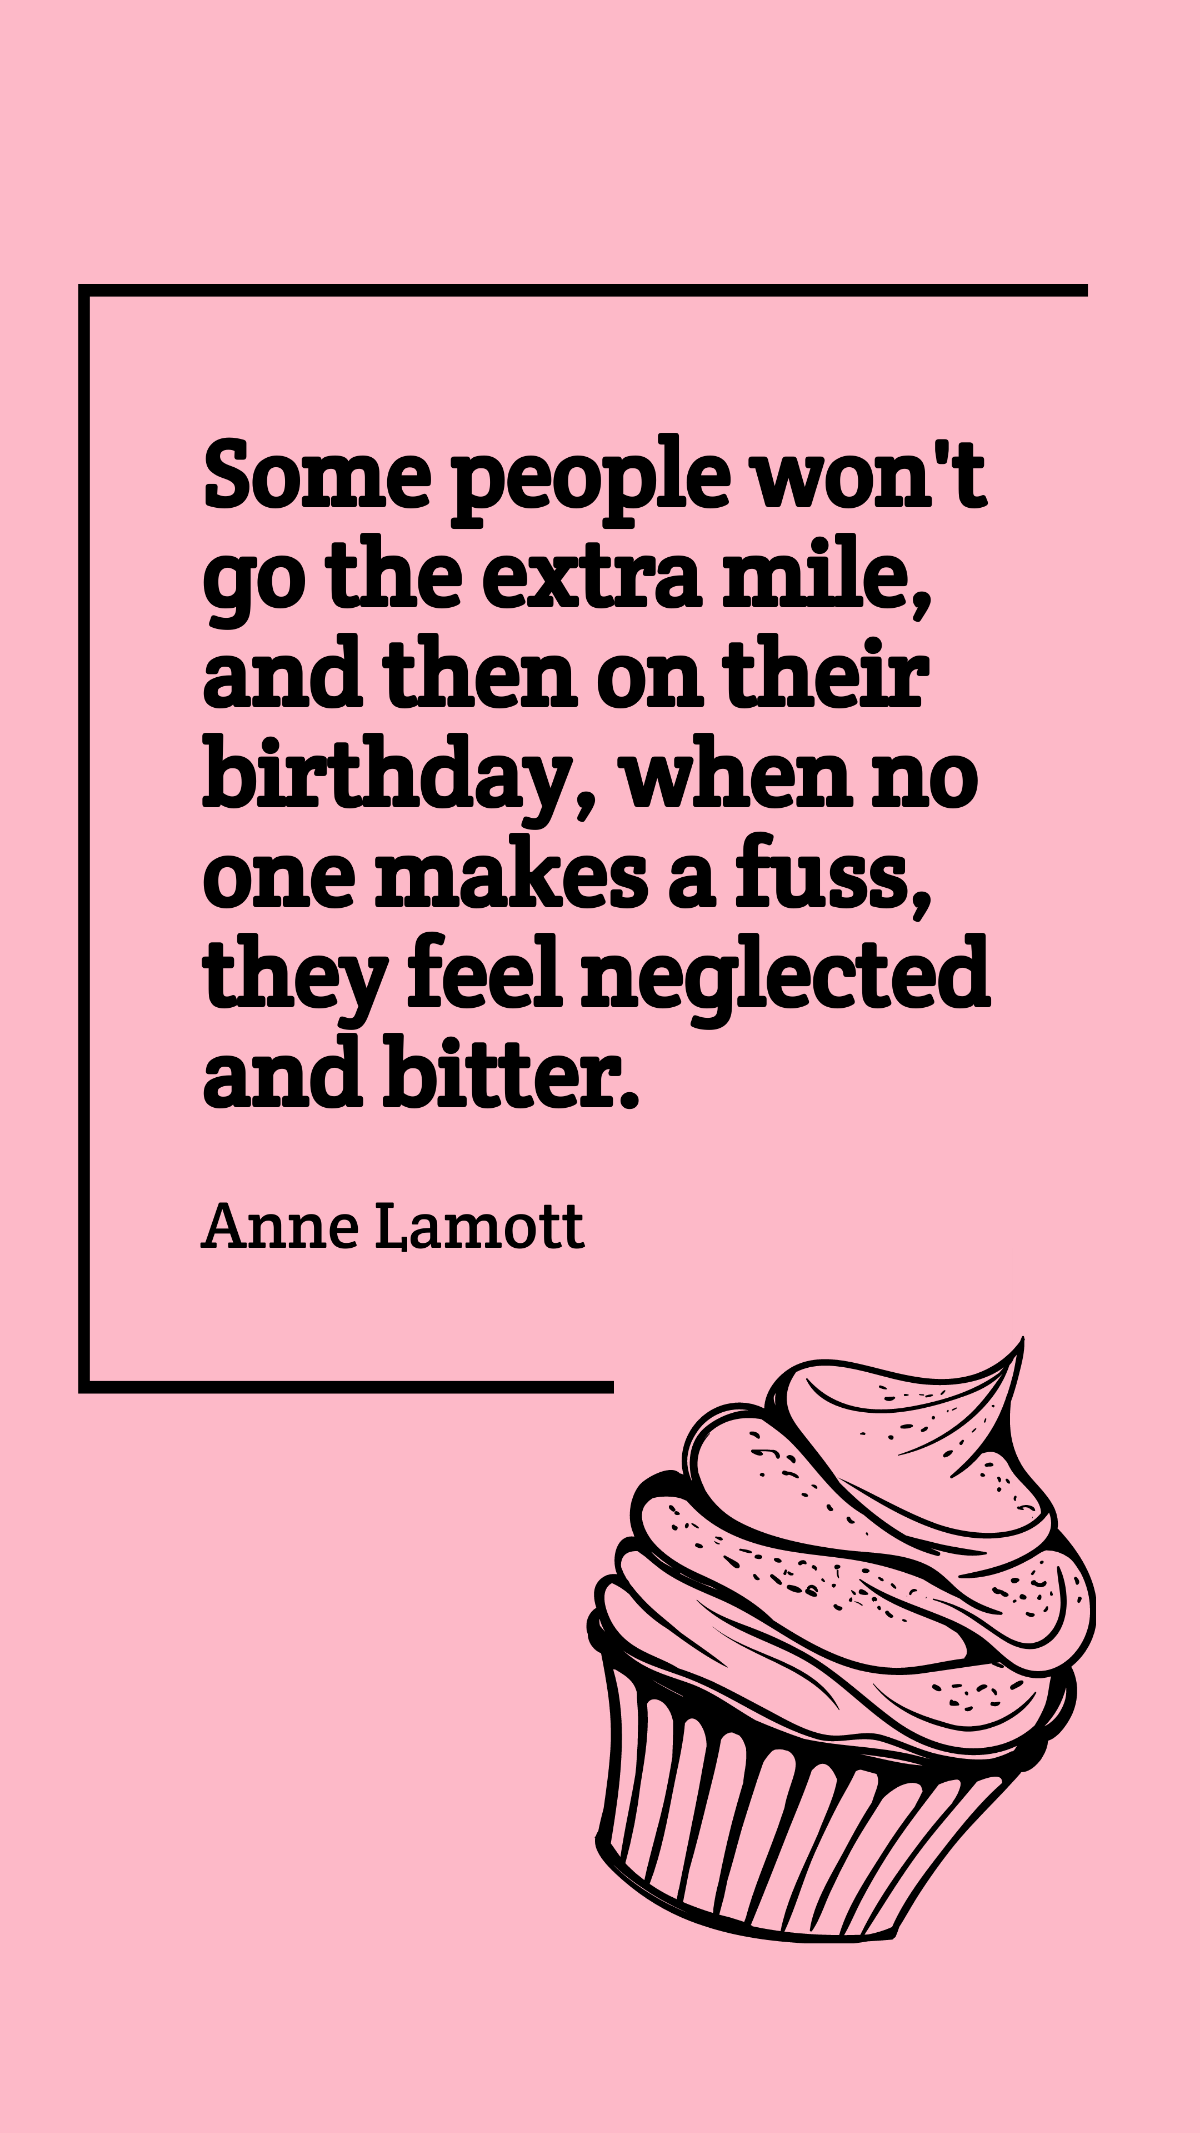 Anne Lamott - Some people won't go the extra mile, and then on their birthday, when no one makes a fuss, they feel neglected and bitter. Template